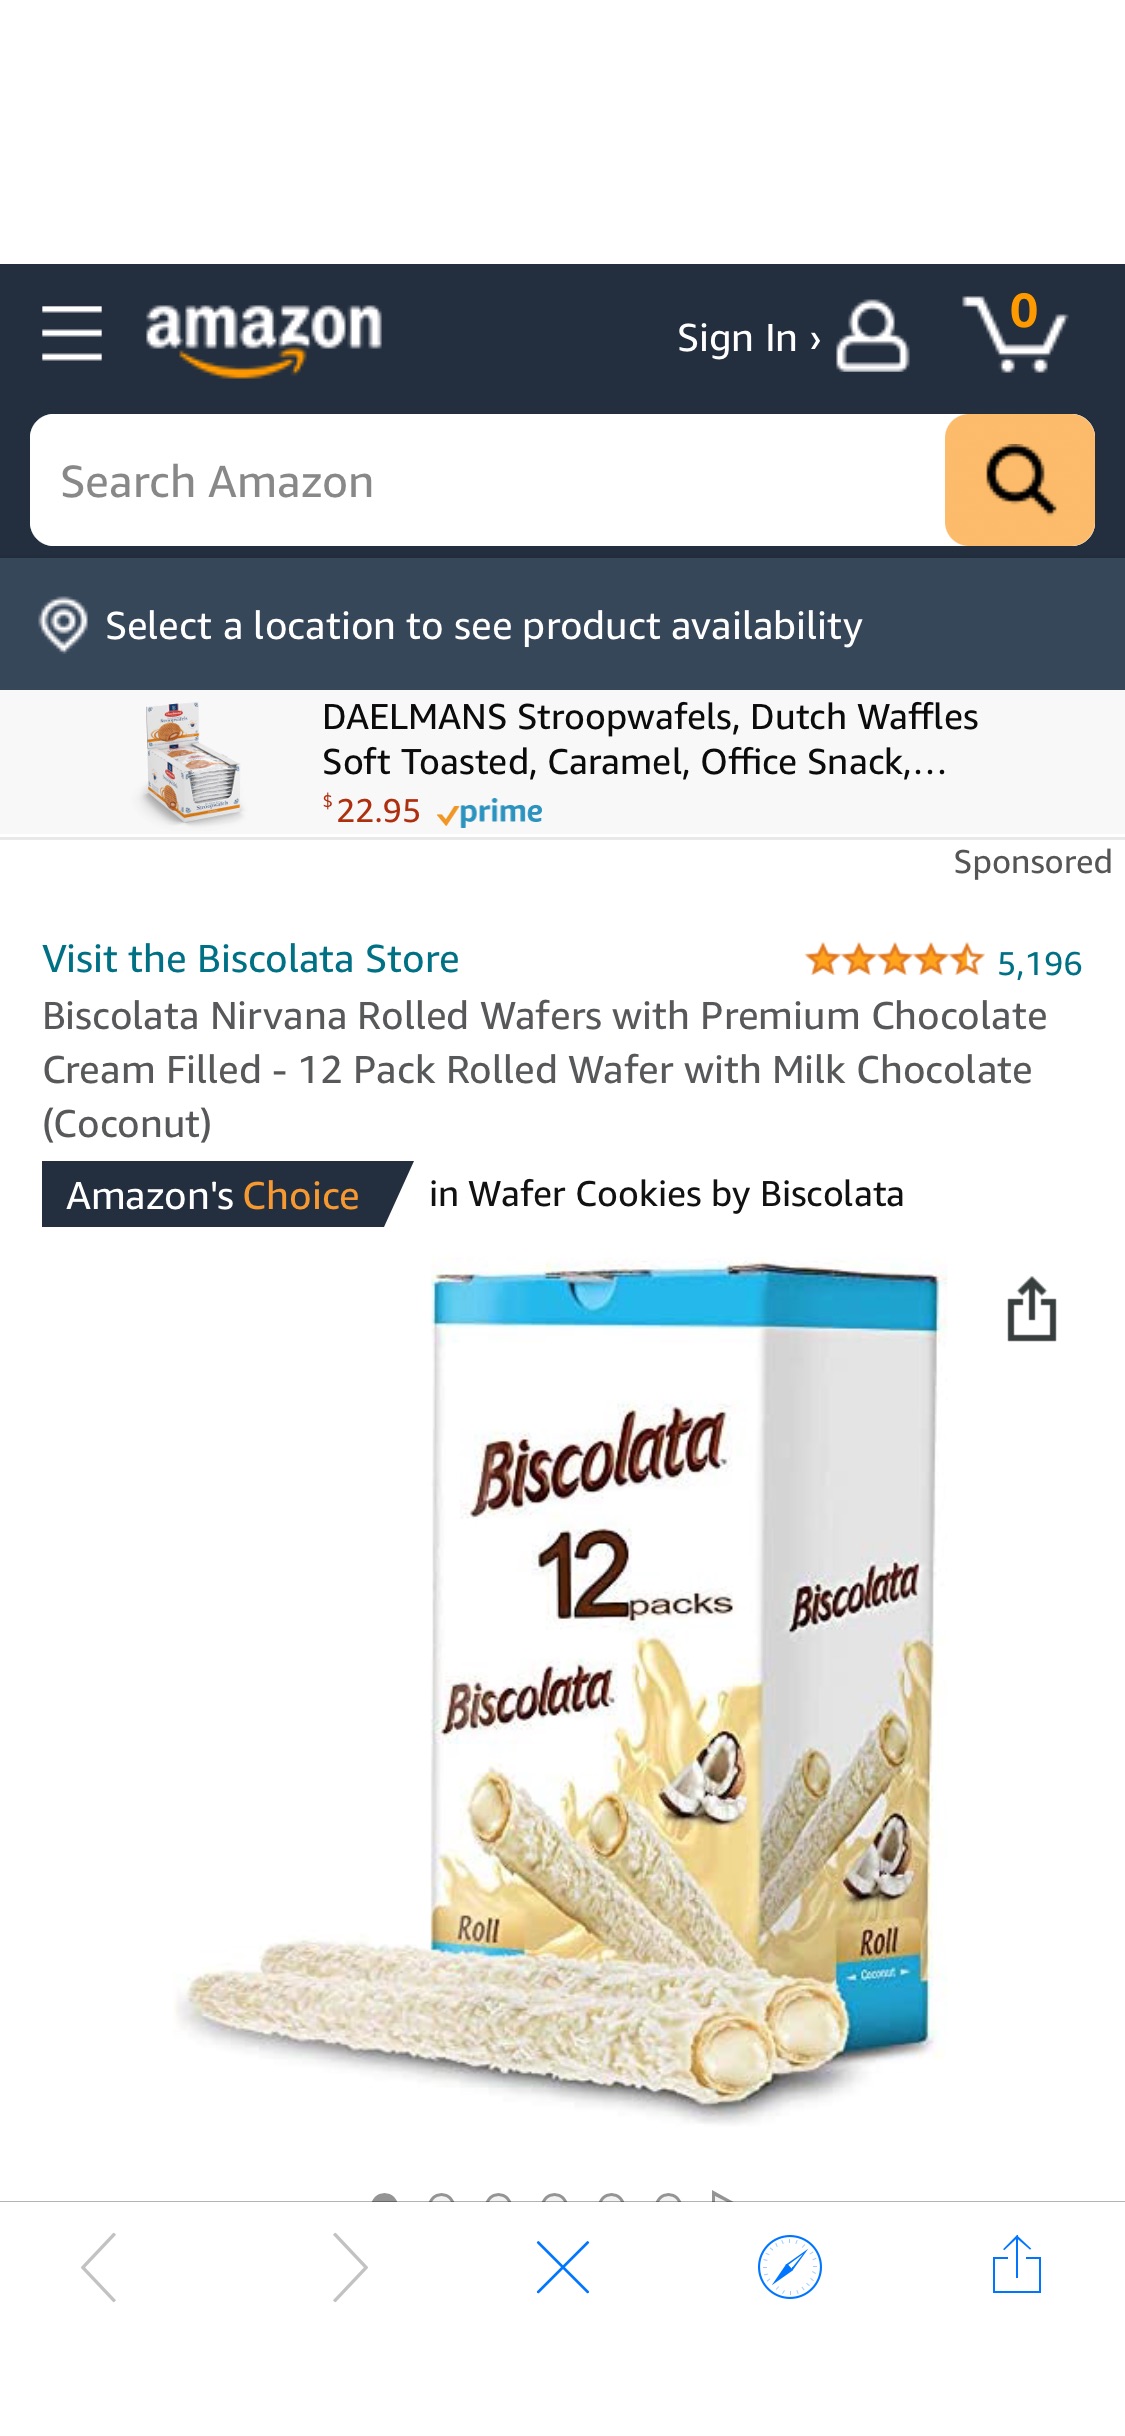 Amazon.com: Biscolata Nirvana Rolled Wafers with Premium Chocolate Cream Filled - 12 Pack Rolled Wafer with Milk Chocolate (Coconut) : Grocery & Gourmet Food 零食